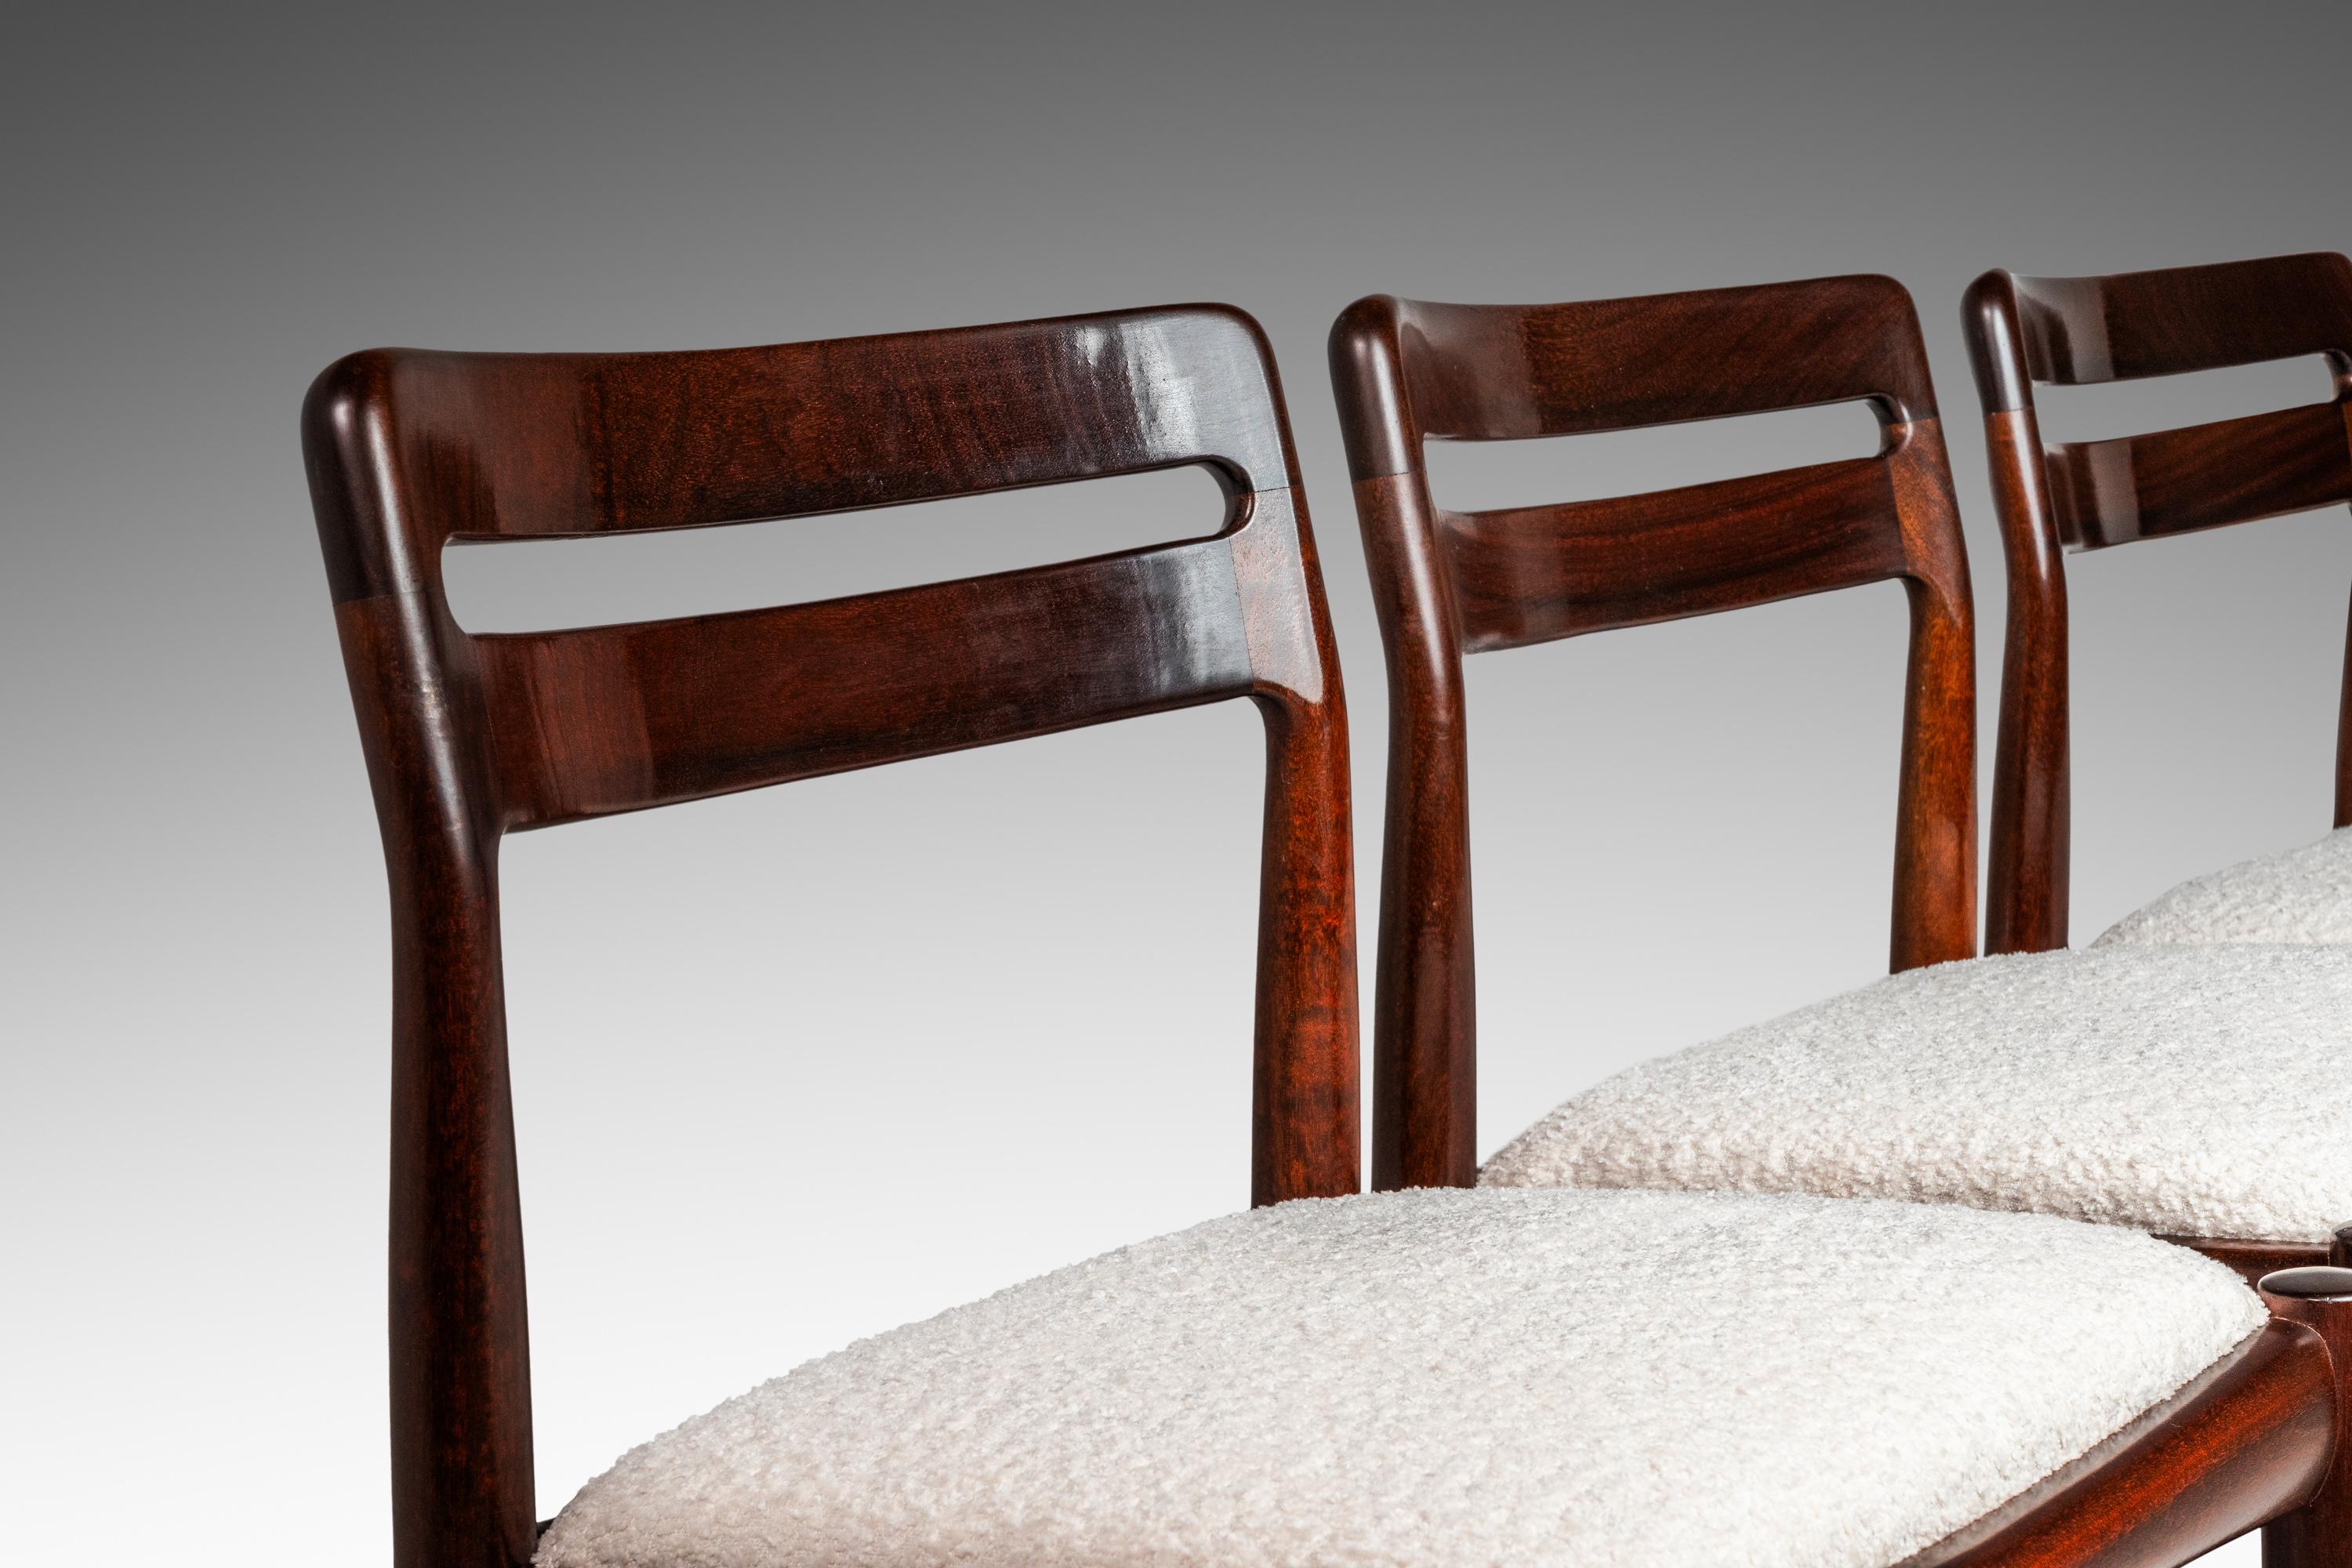 Set of 4 Model 382 Dining Chairs in Mahogany by H.W. Klein, Denmark, c. 1960s For Sale 5